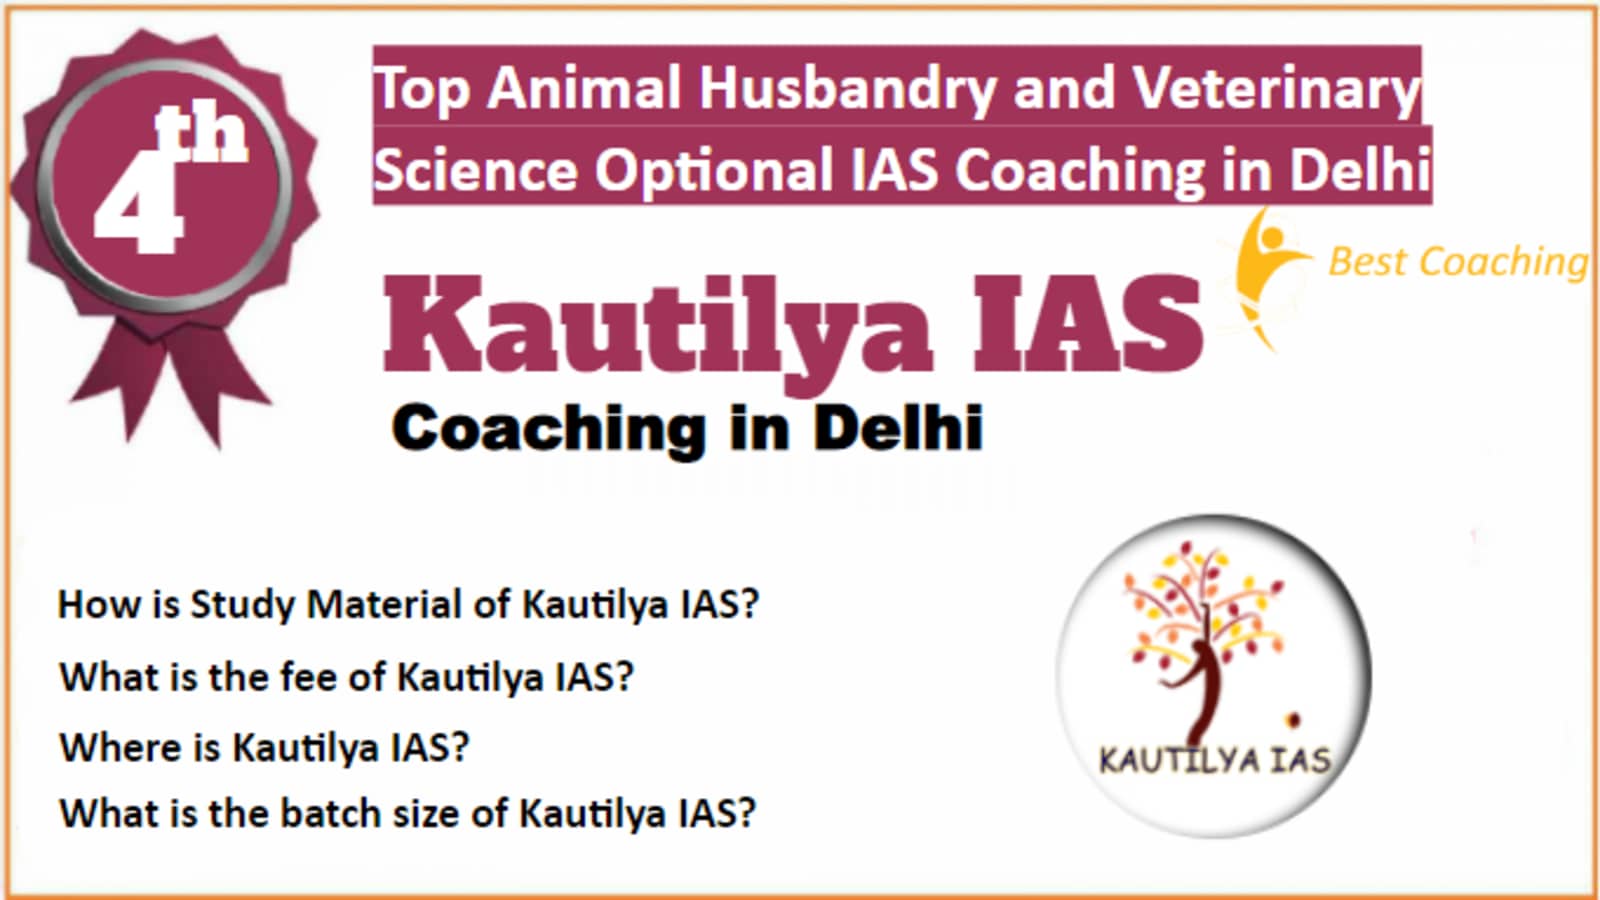 Best Animal Husbandry and Veterinary Science Optional IAS Coaching in Delhi  